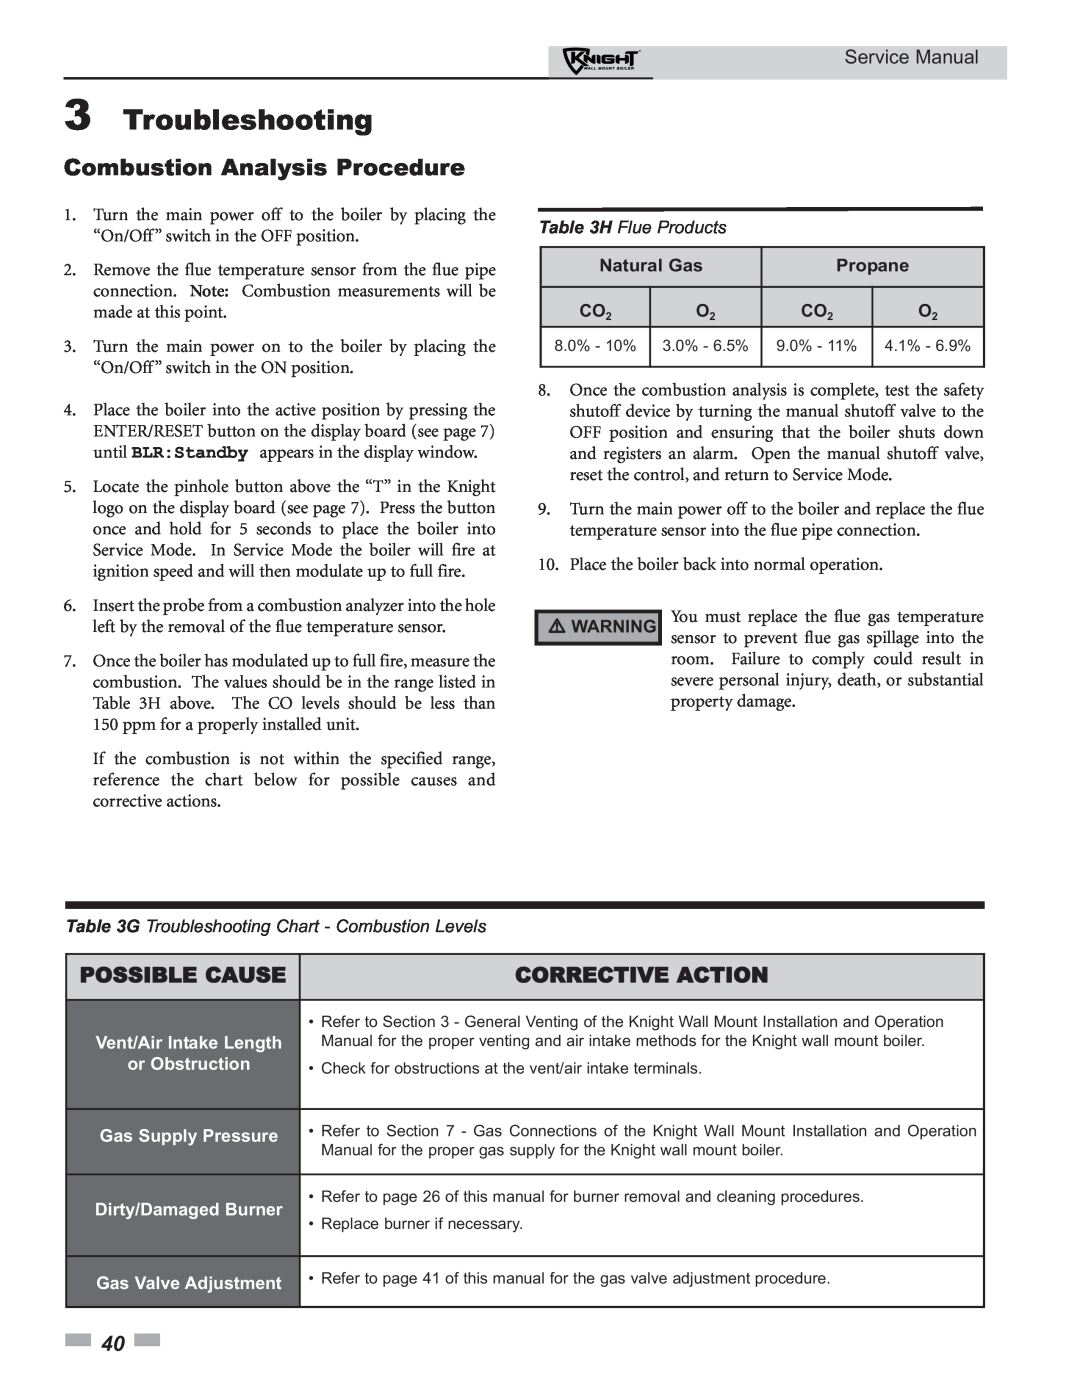 Lochinvar 50-210 Combustion Analysis Procedure, Possible Cause, Troubleshooting, Corrective Action, Service Manual 